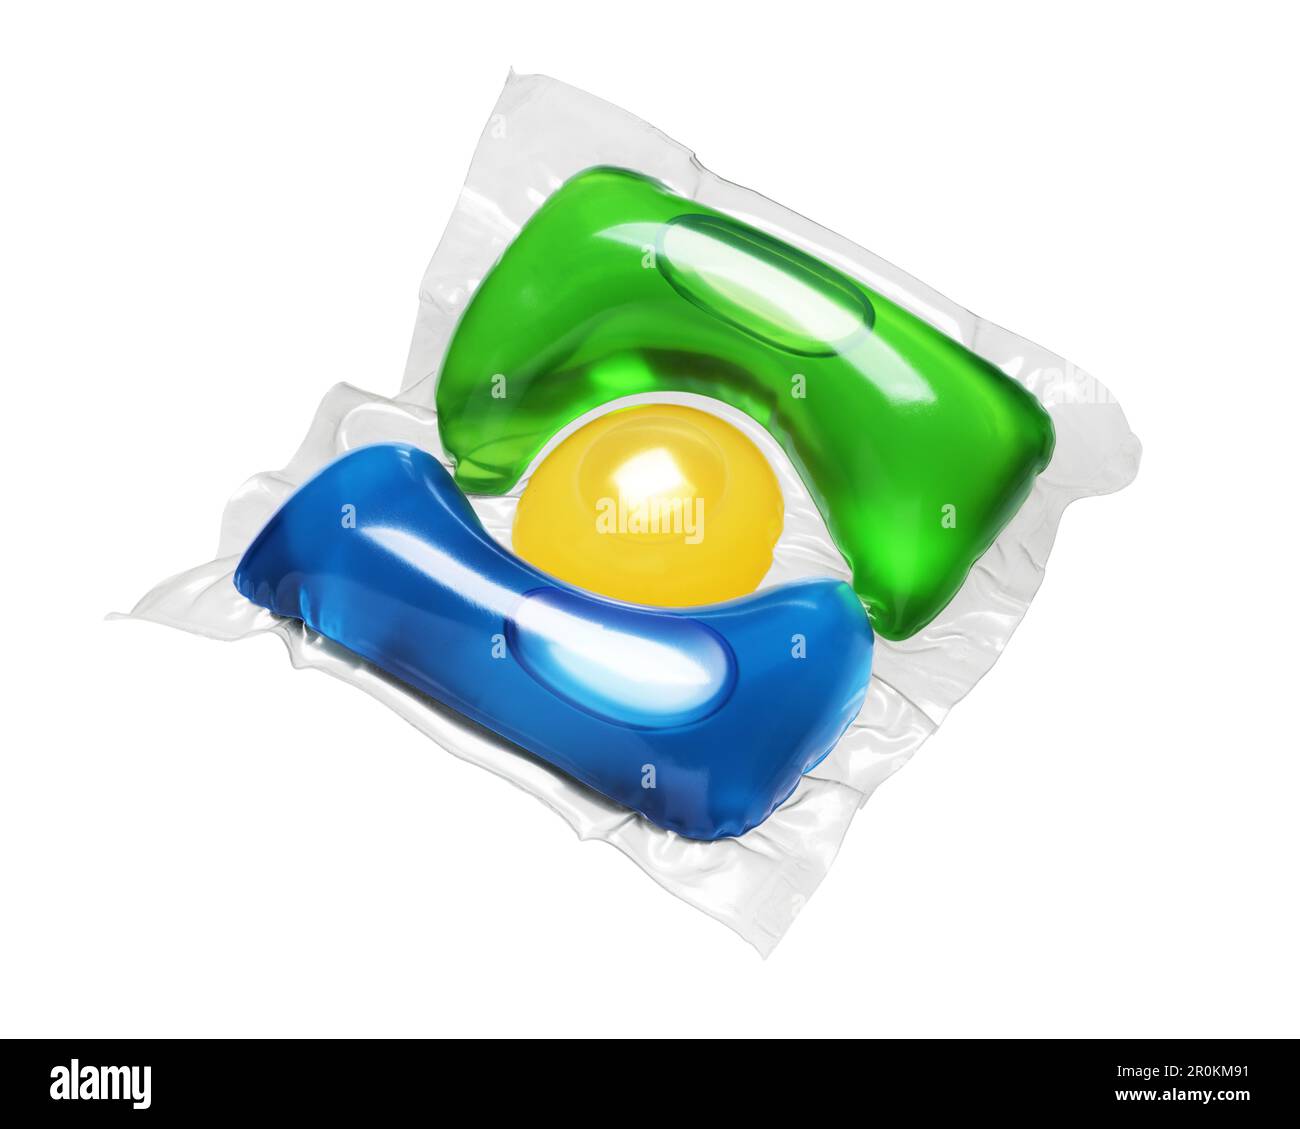 Laundry detergent pod blue, green and yellow colored isolated on white background. Stock Photo